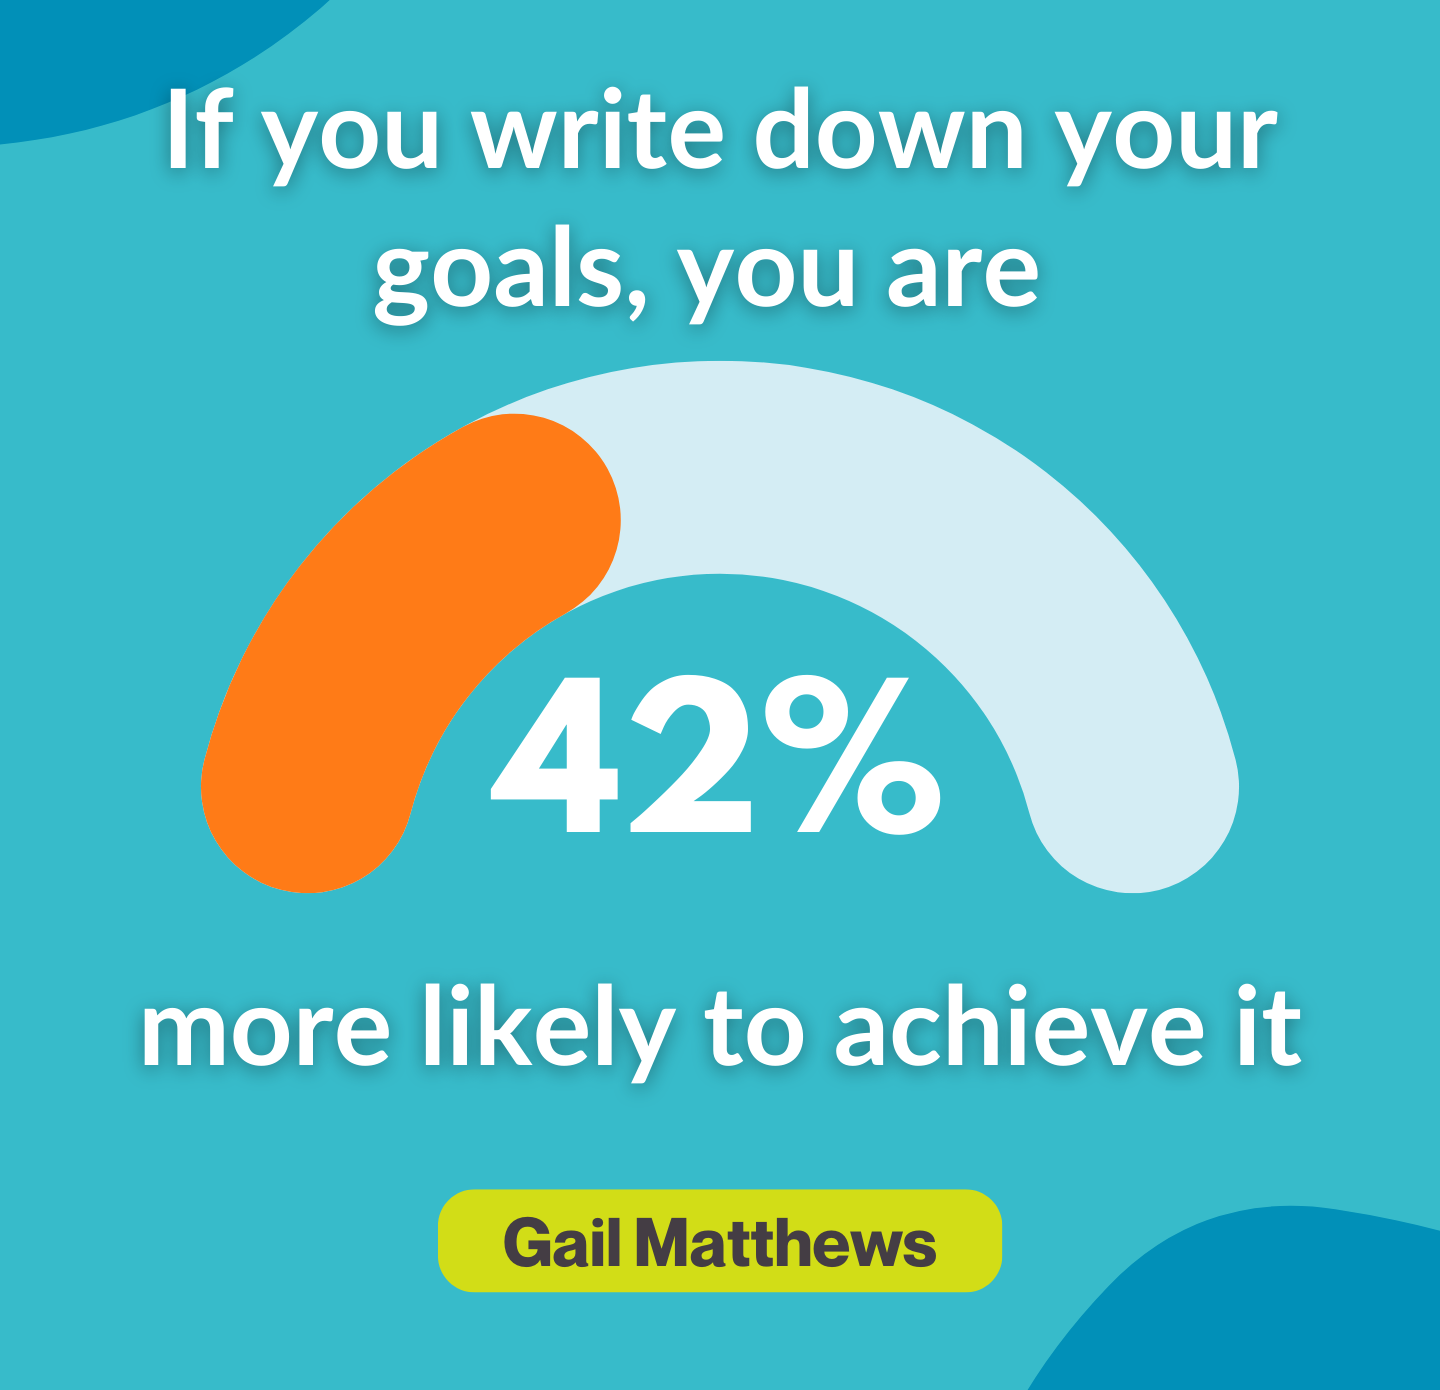 Goal Setting - write down your goals